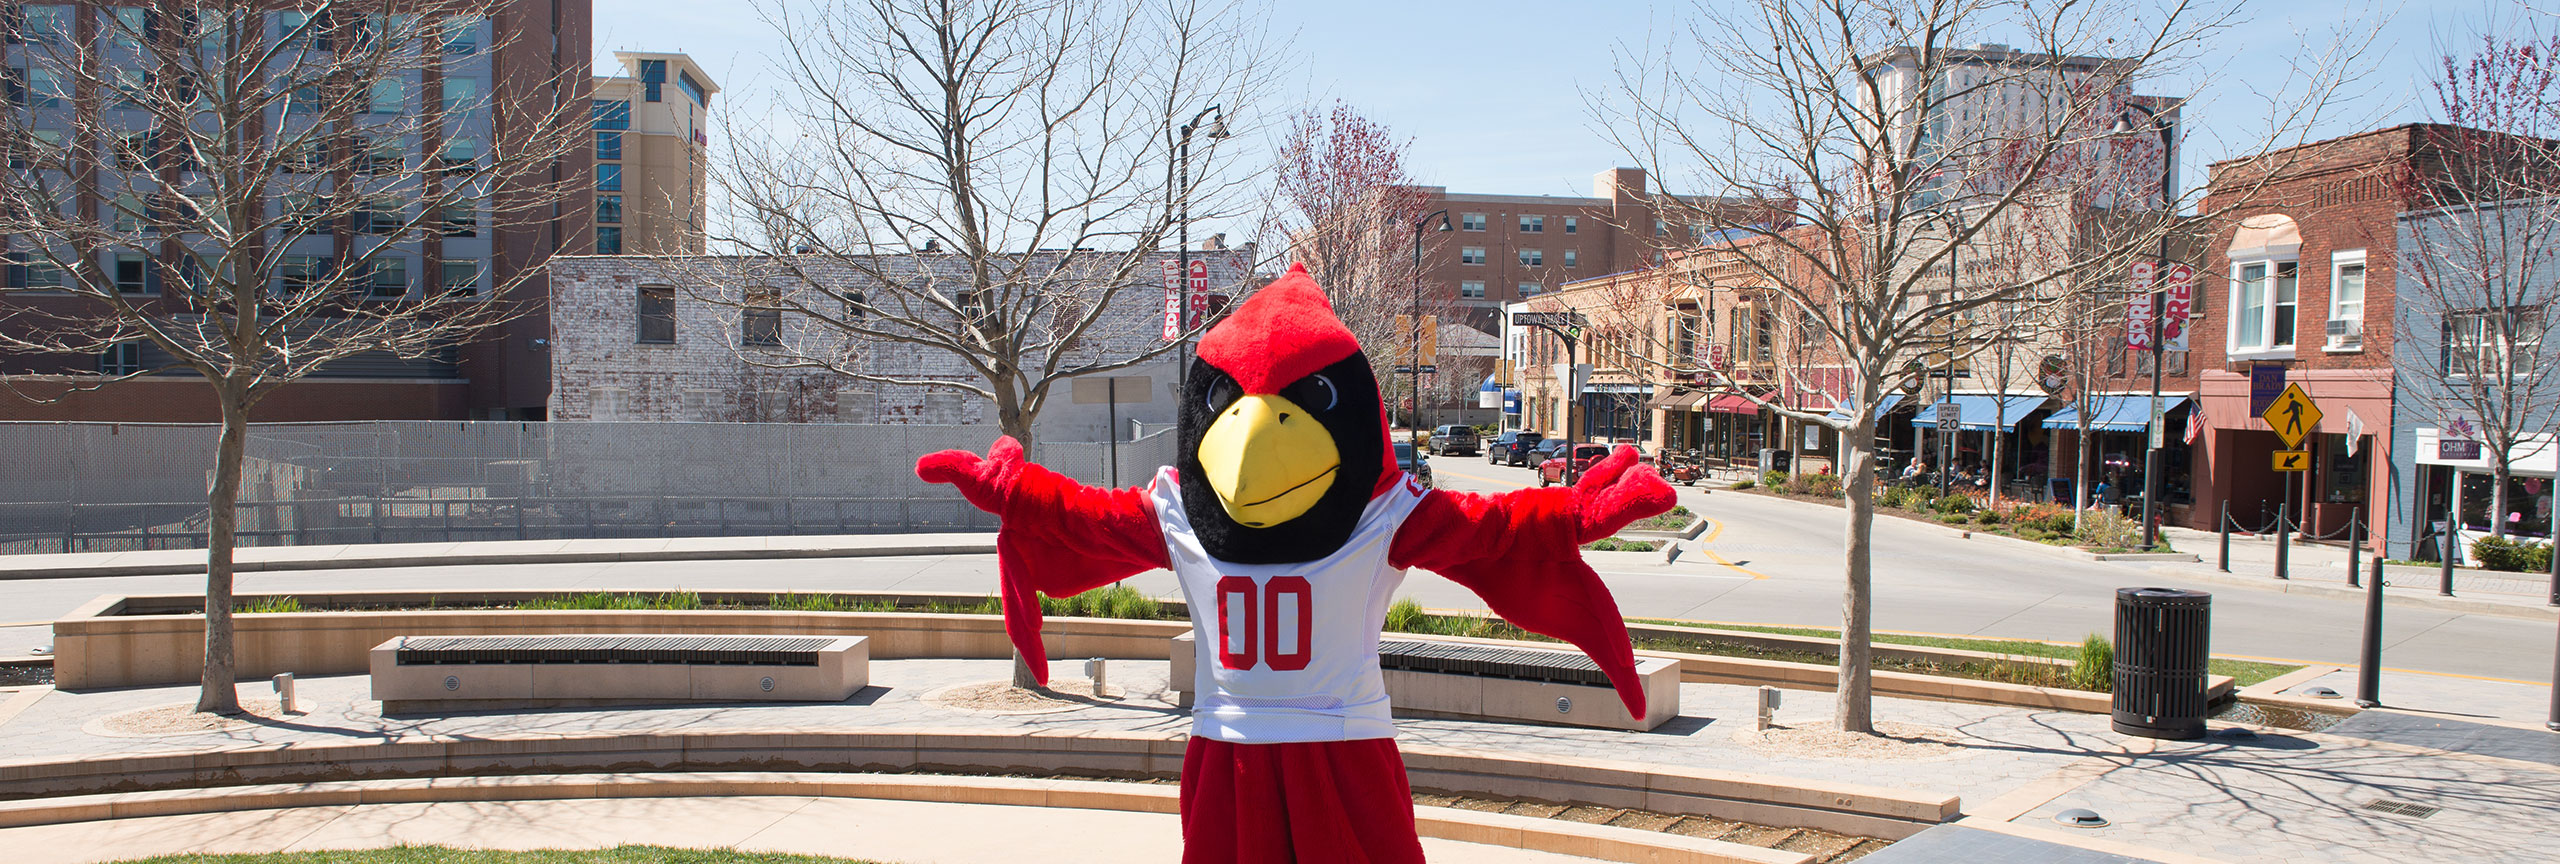 Explore the Campus and Community Family Weekend Illinois State